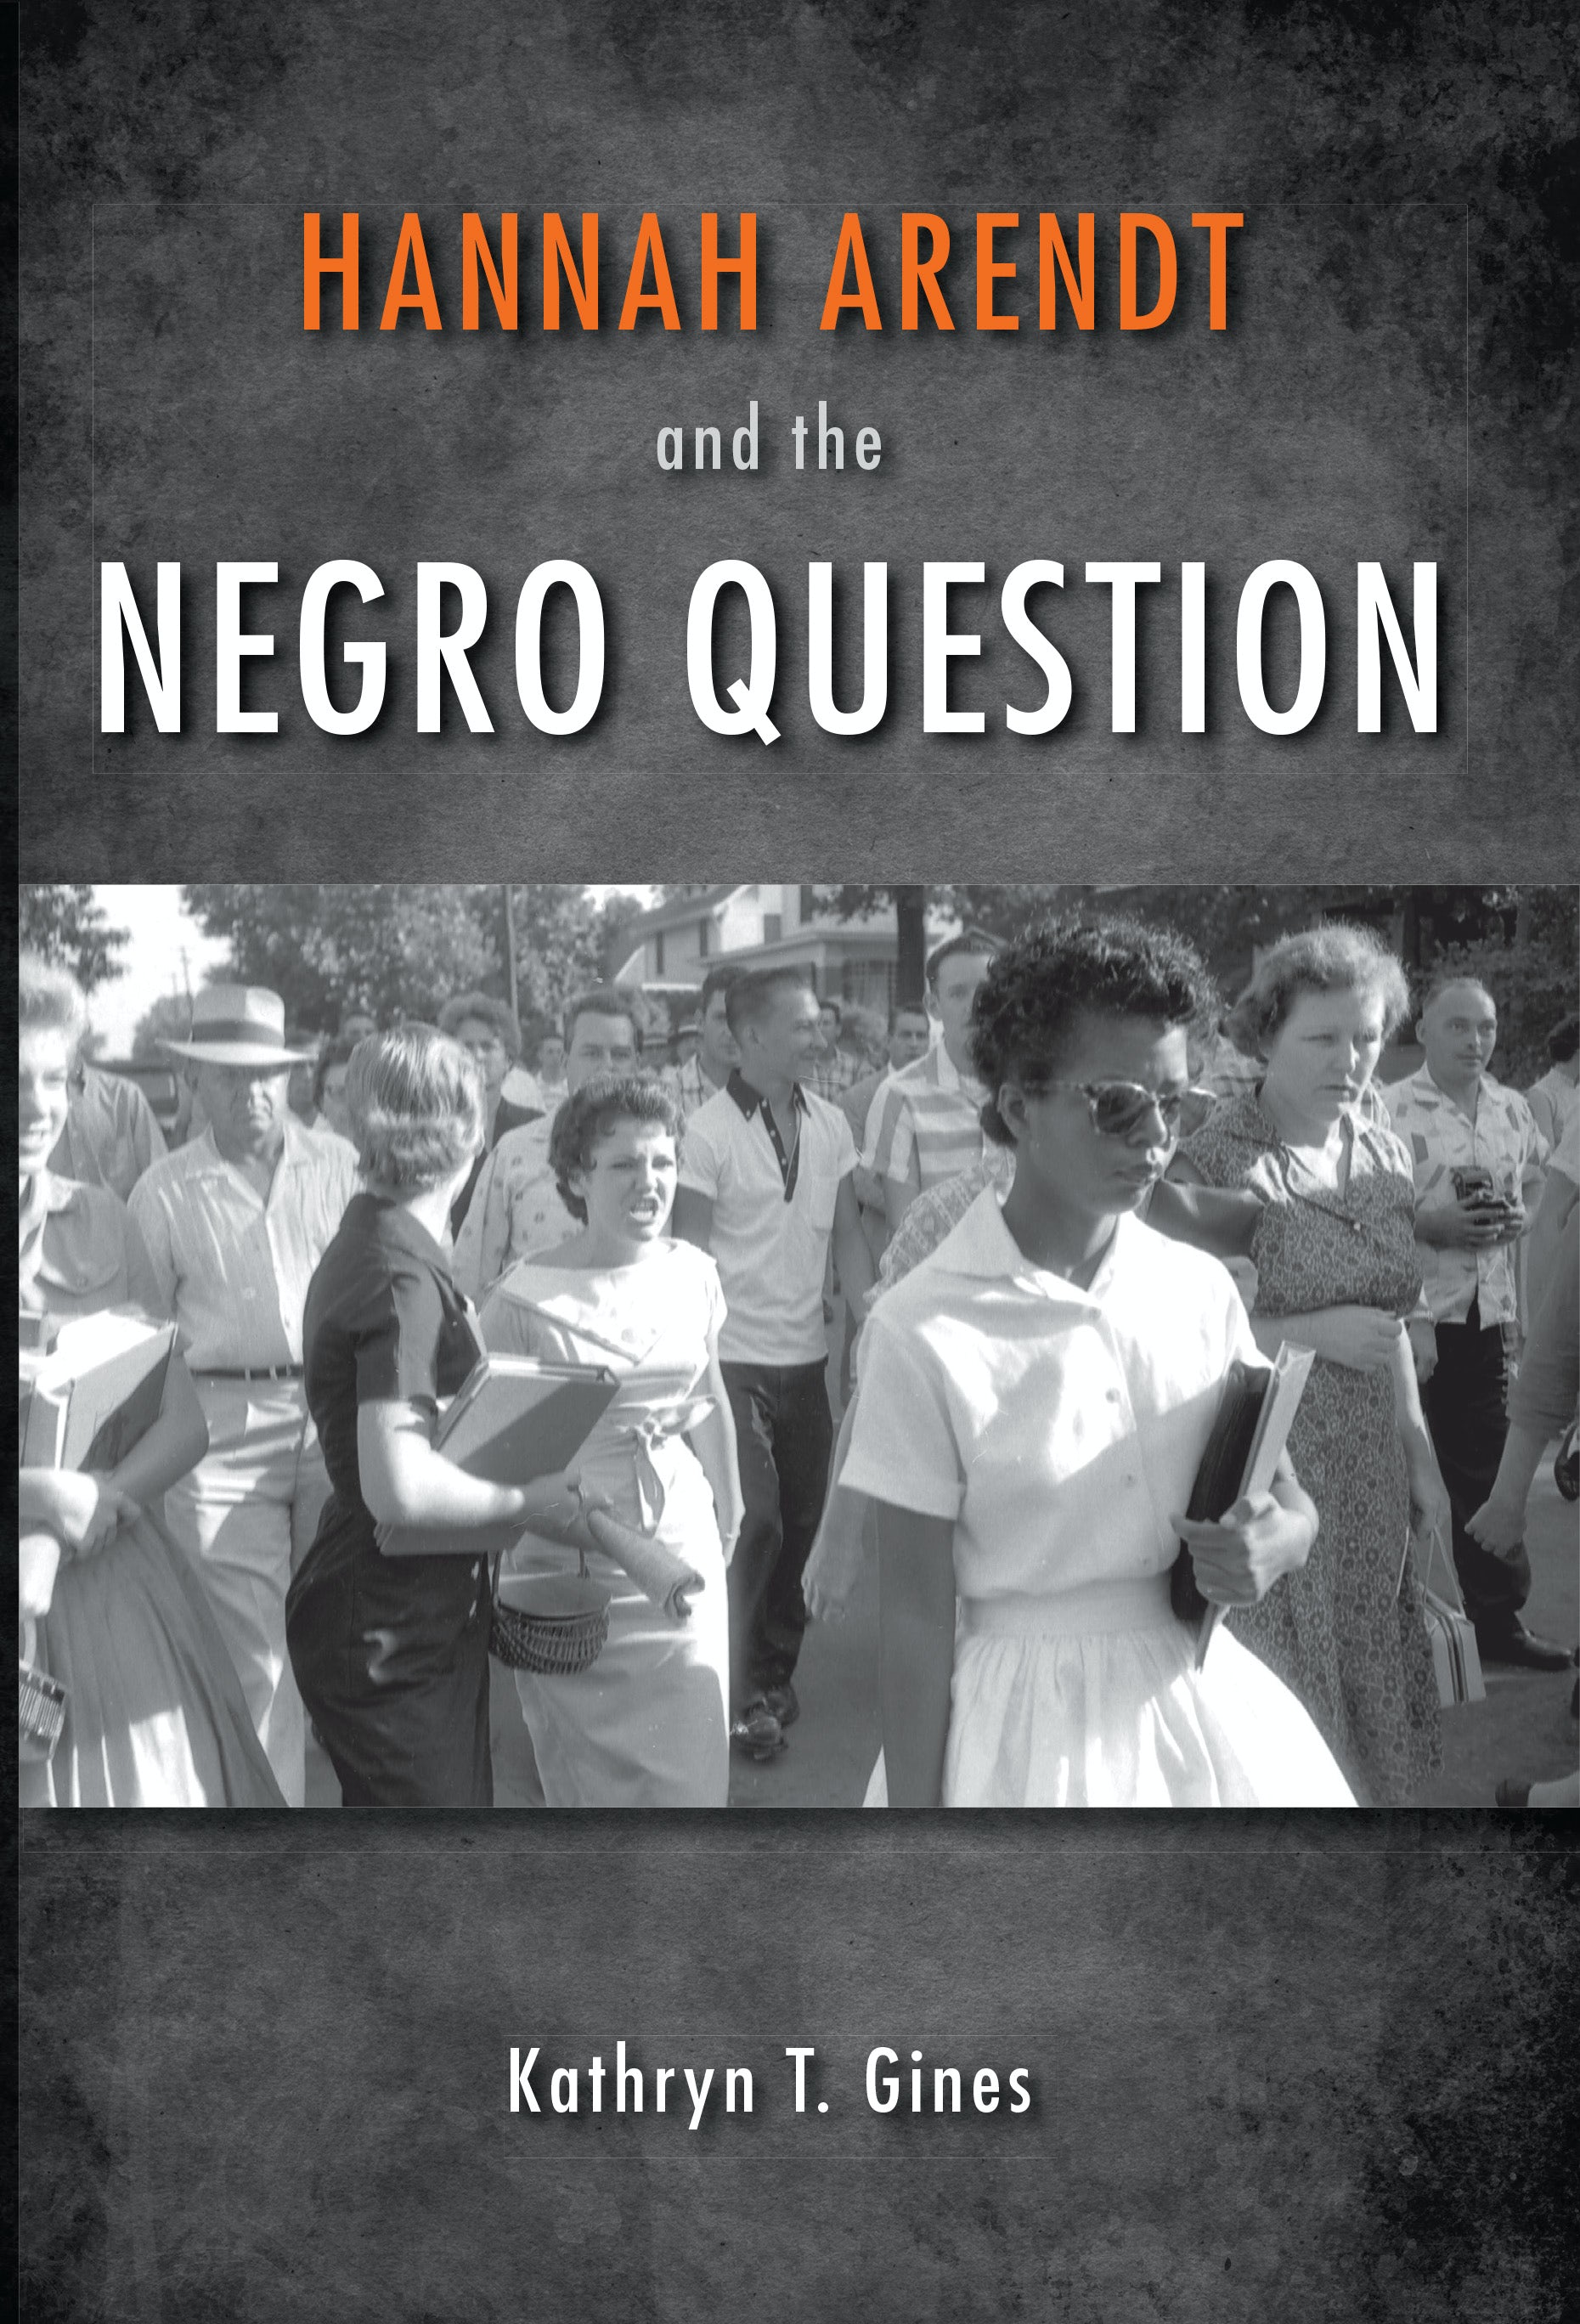 Hannah Arendt and the Negro Question (2014, Indiana University Press)